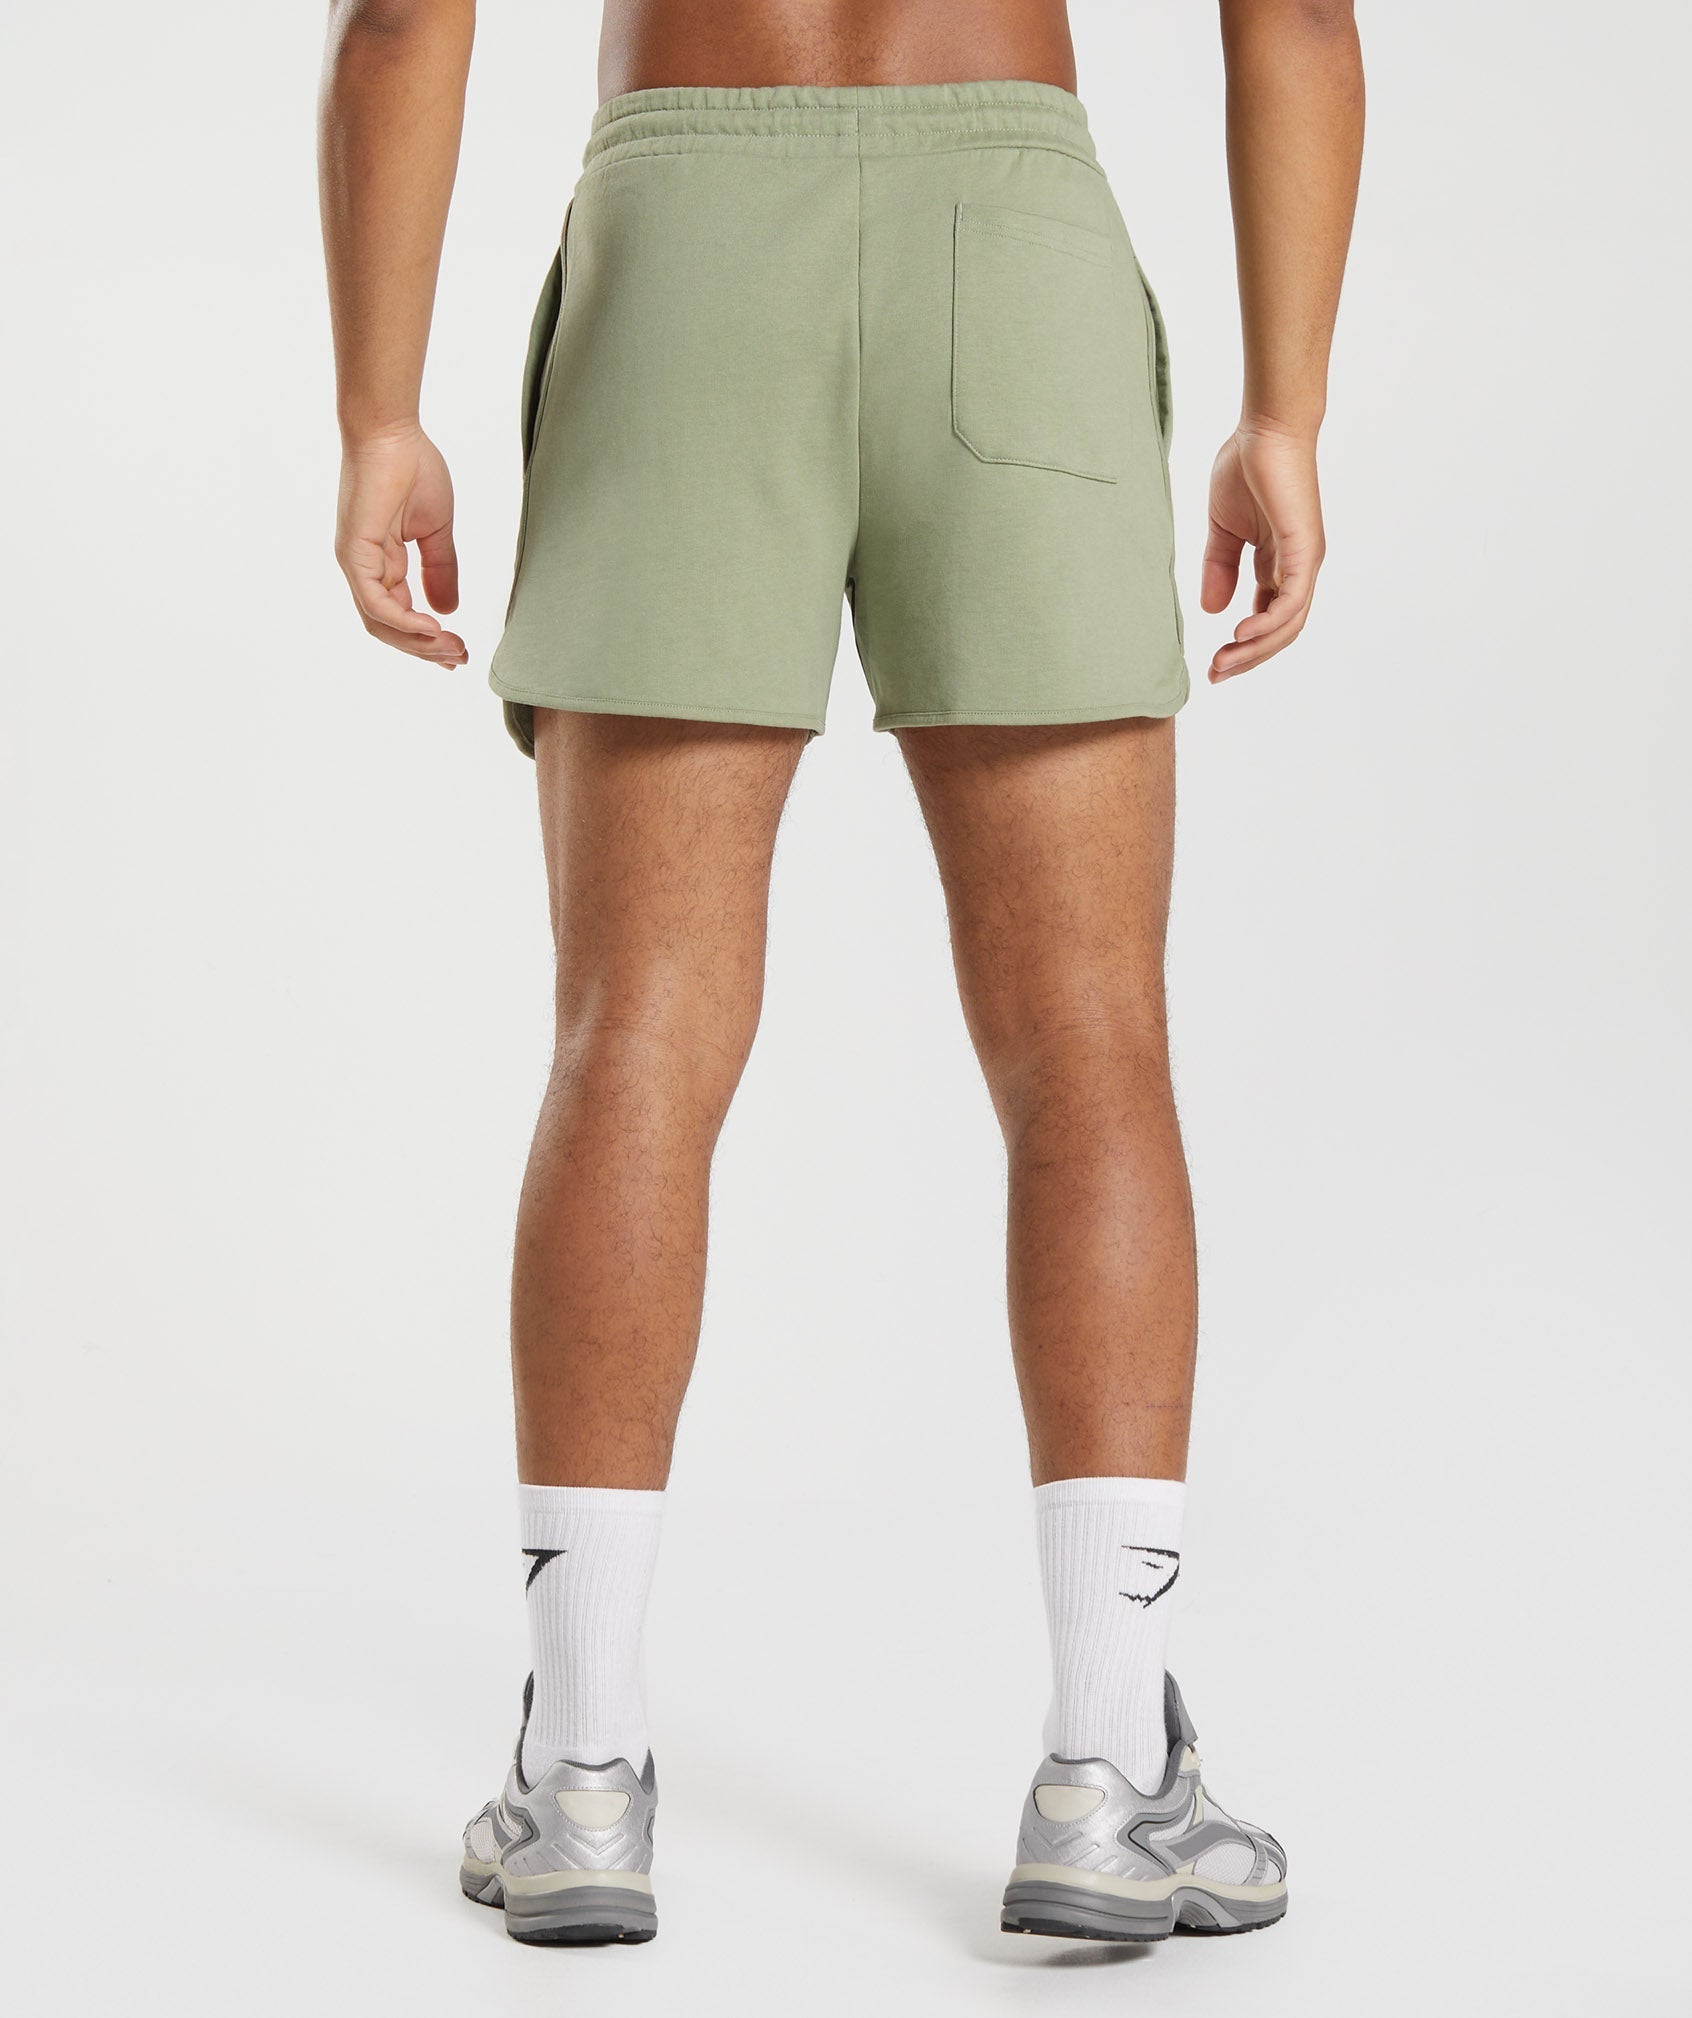 Rest Day Sweats 4'' Lounge Shorts in Sage Green - view 5